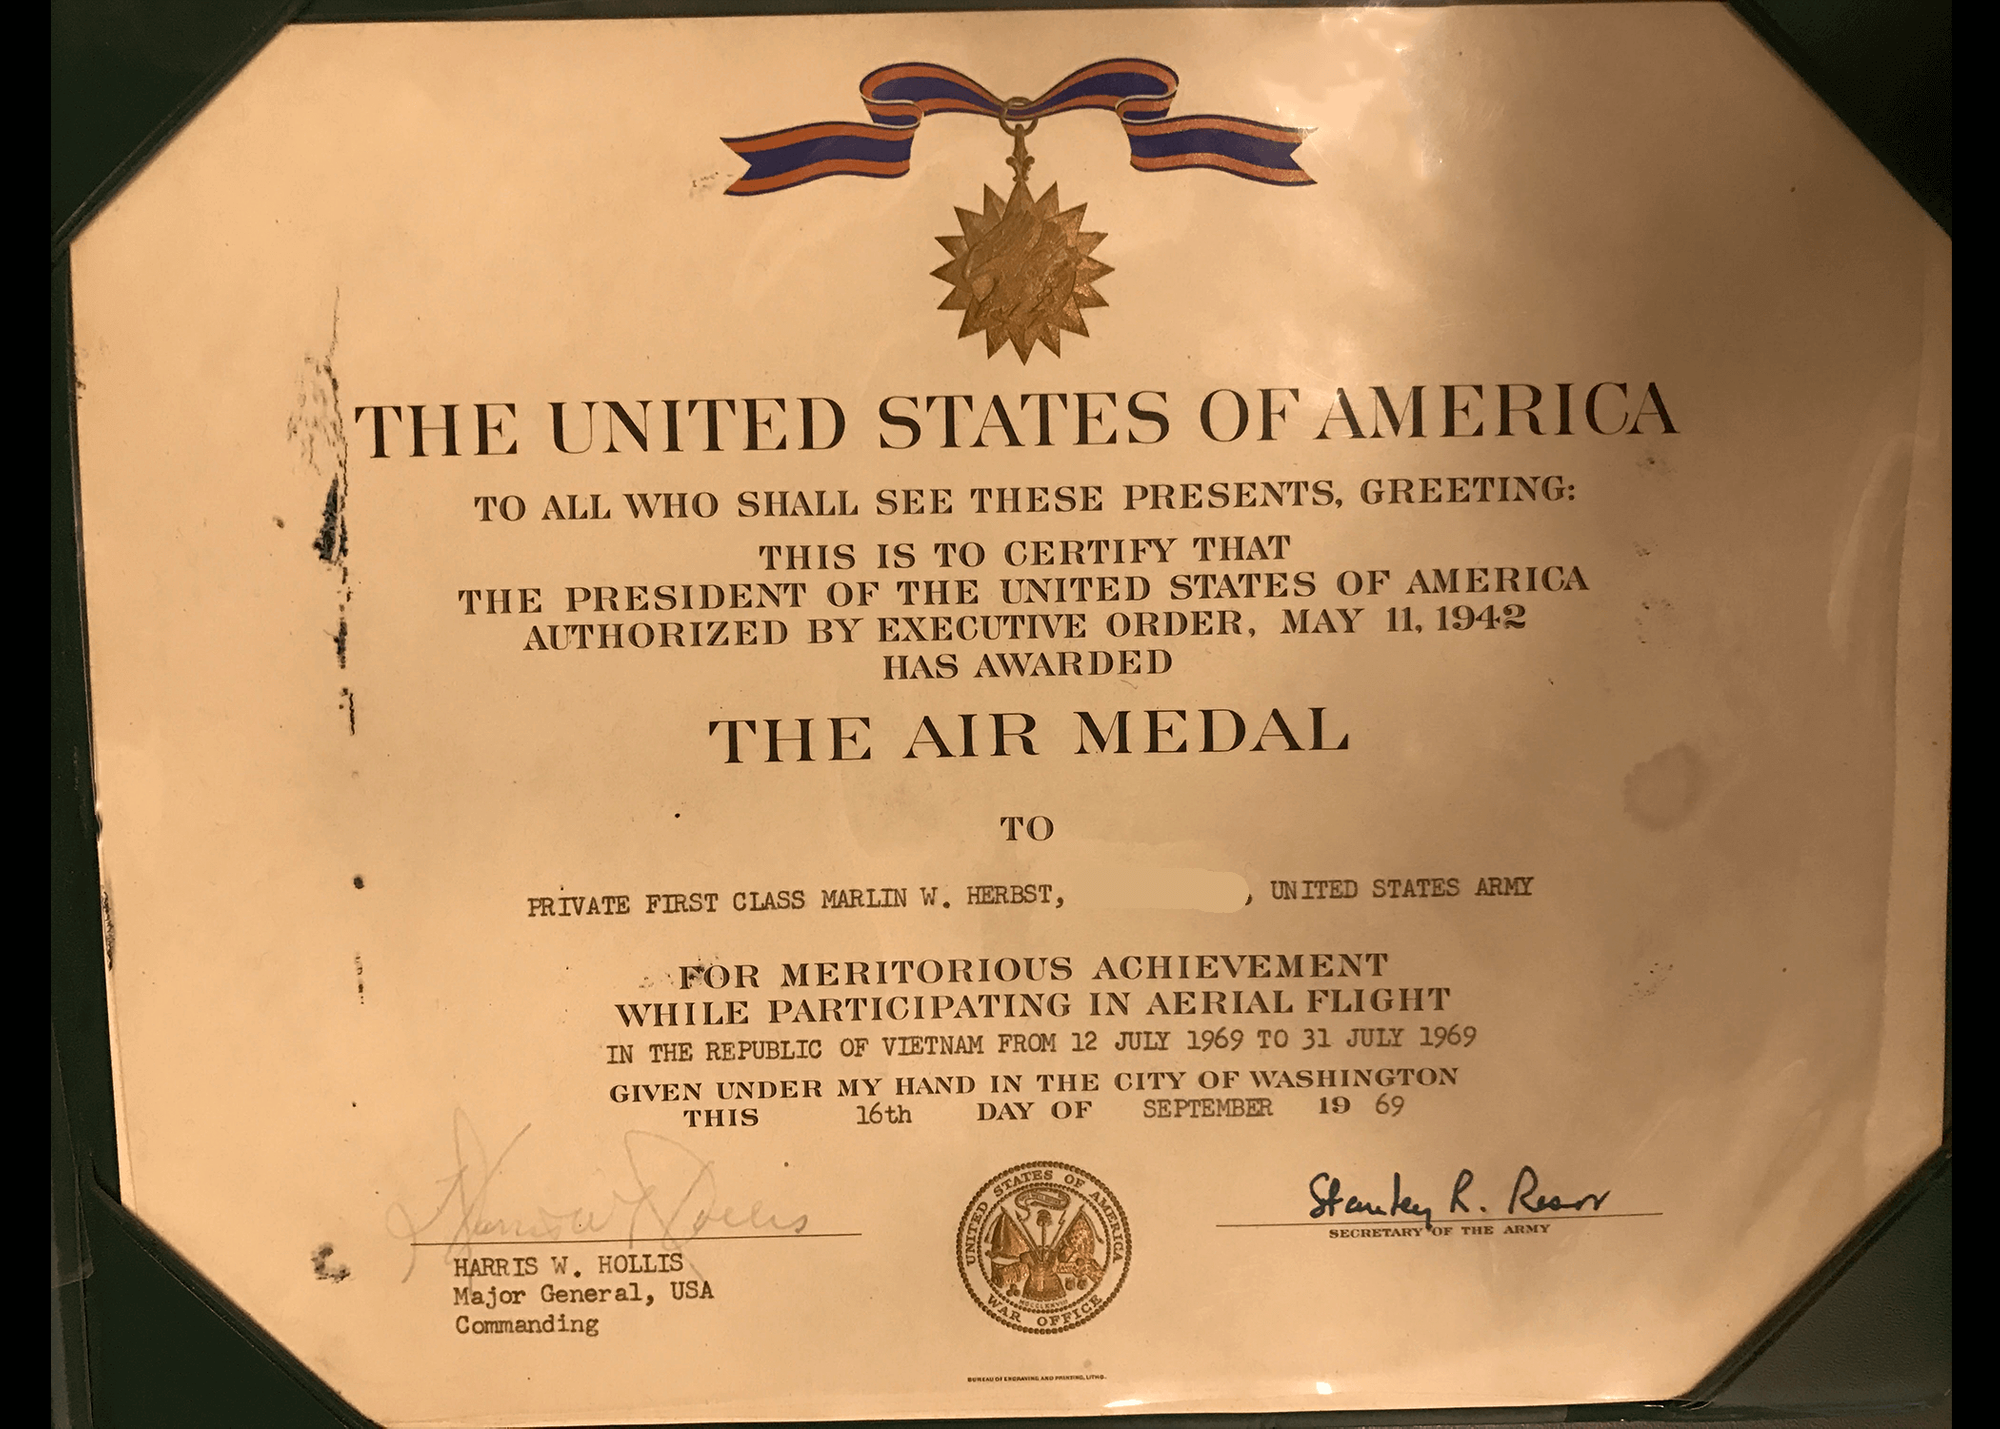 Citation for an Air Medal, presented to Marlin Herbst on 9-16-1969.